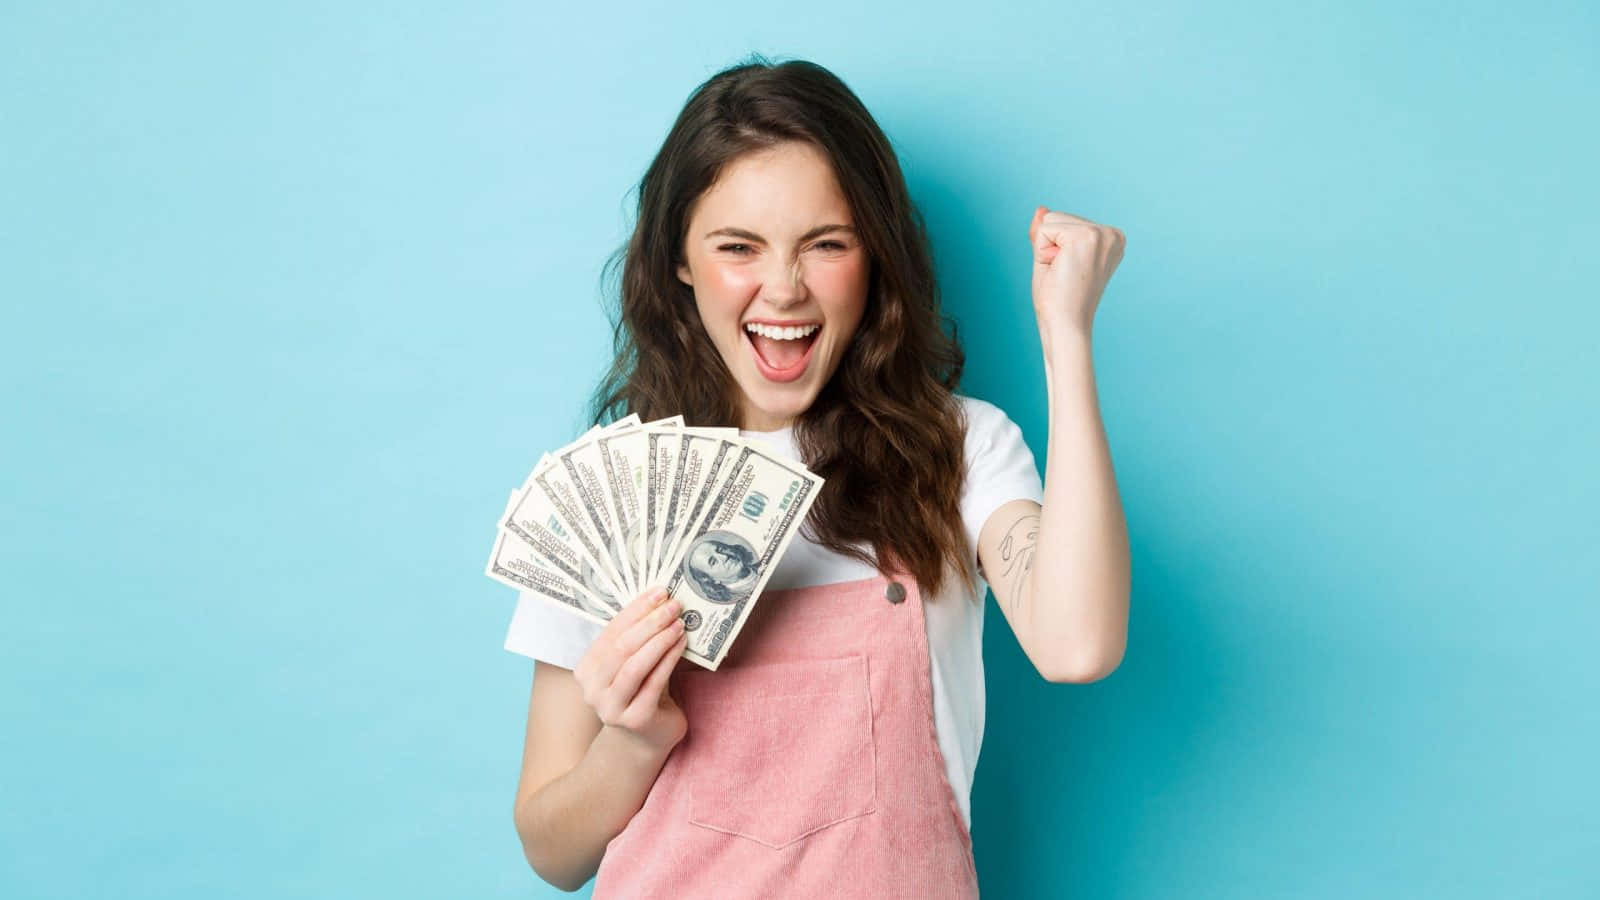 A Woman Holding Up Money And Smiling